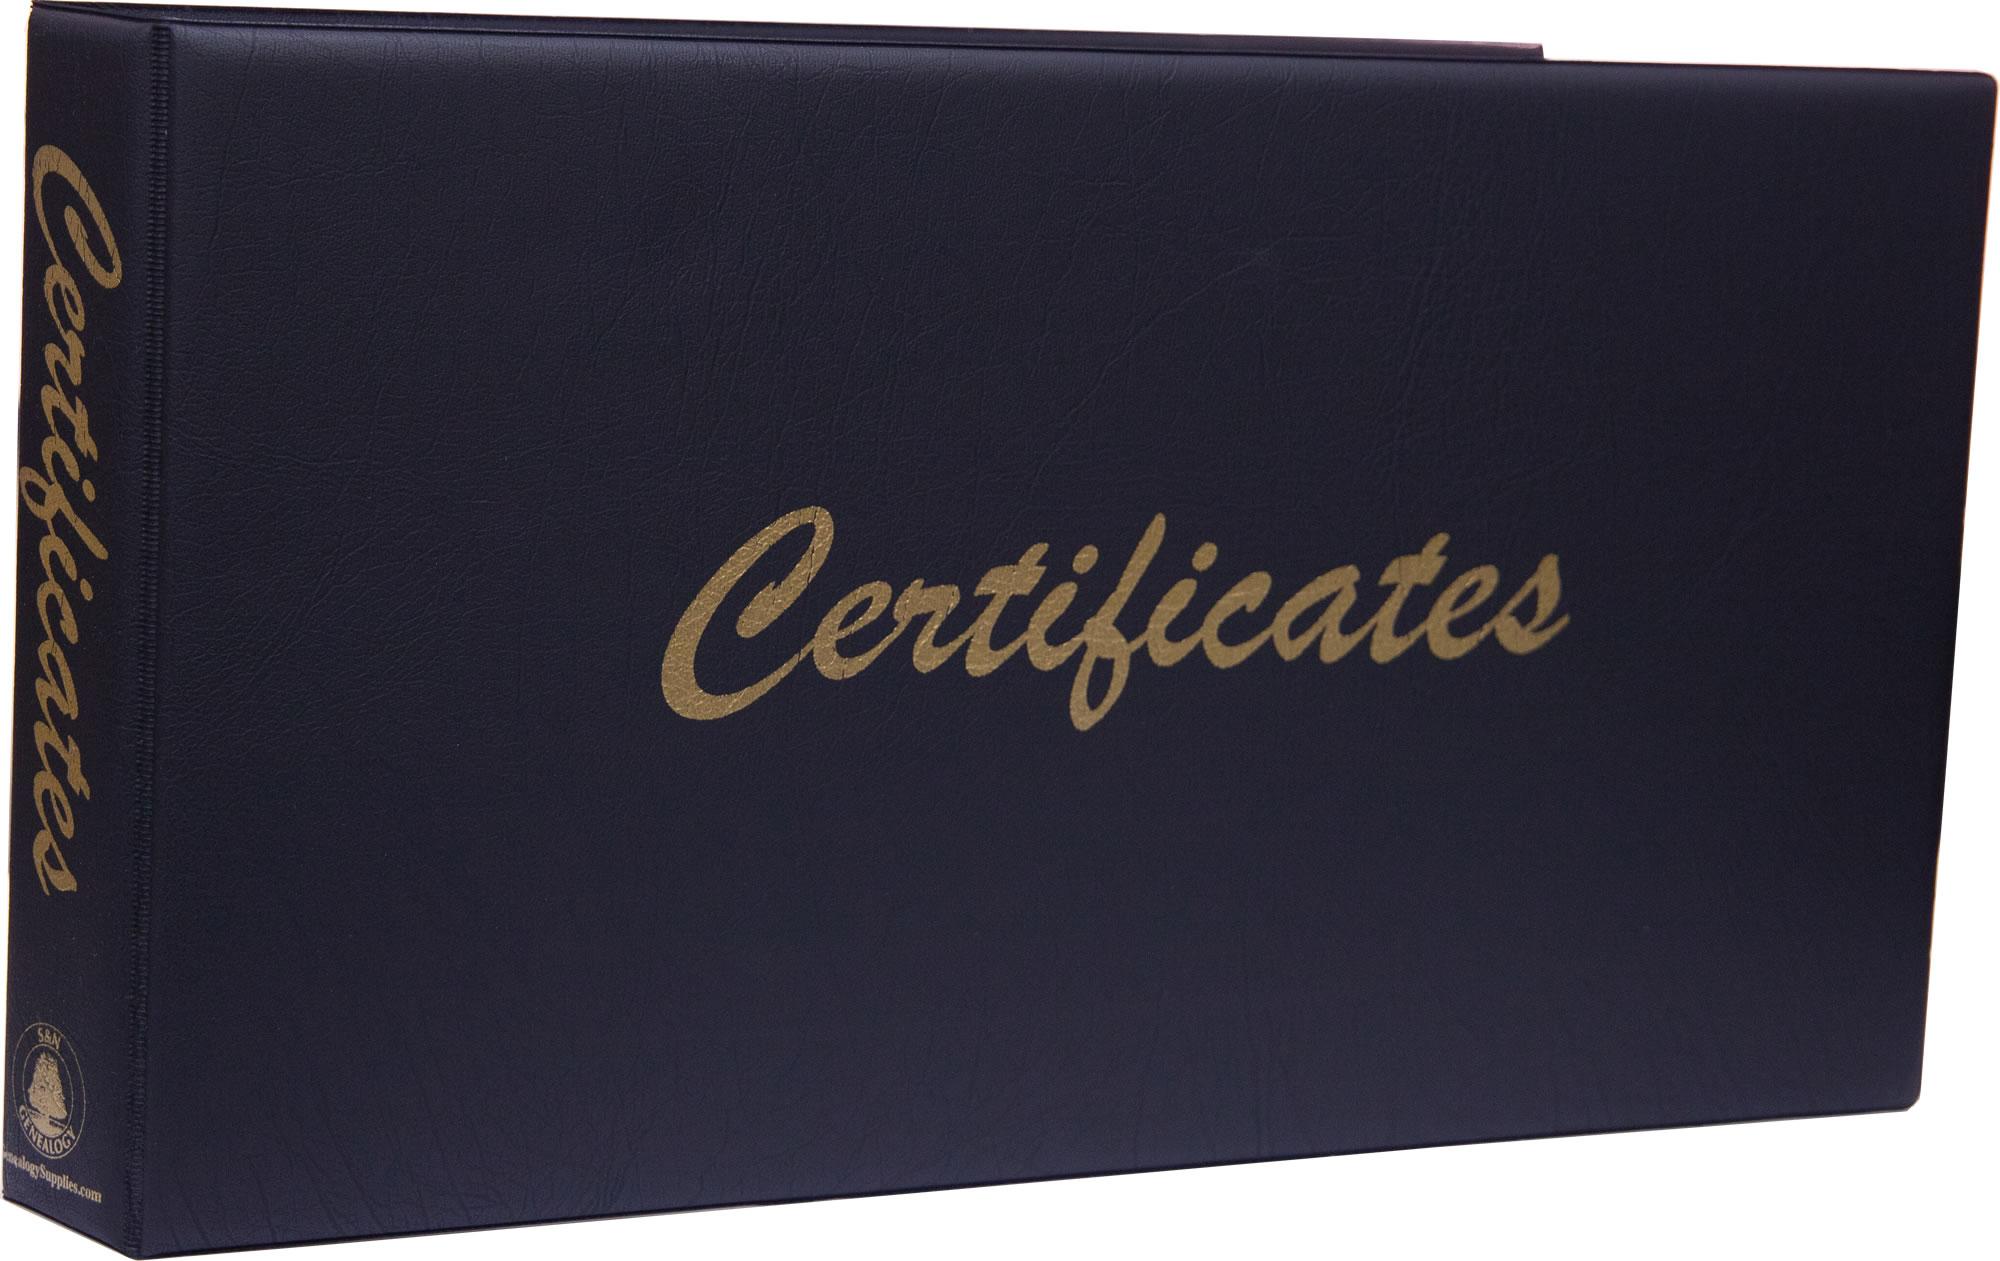 Long Luxury Black Certificate Binder - Limited Edition Soft Cover